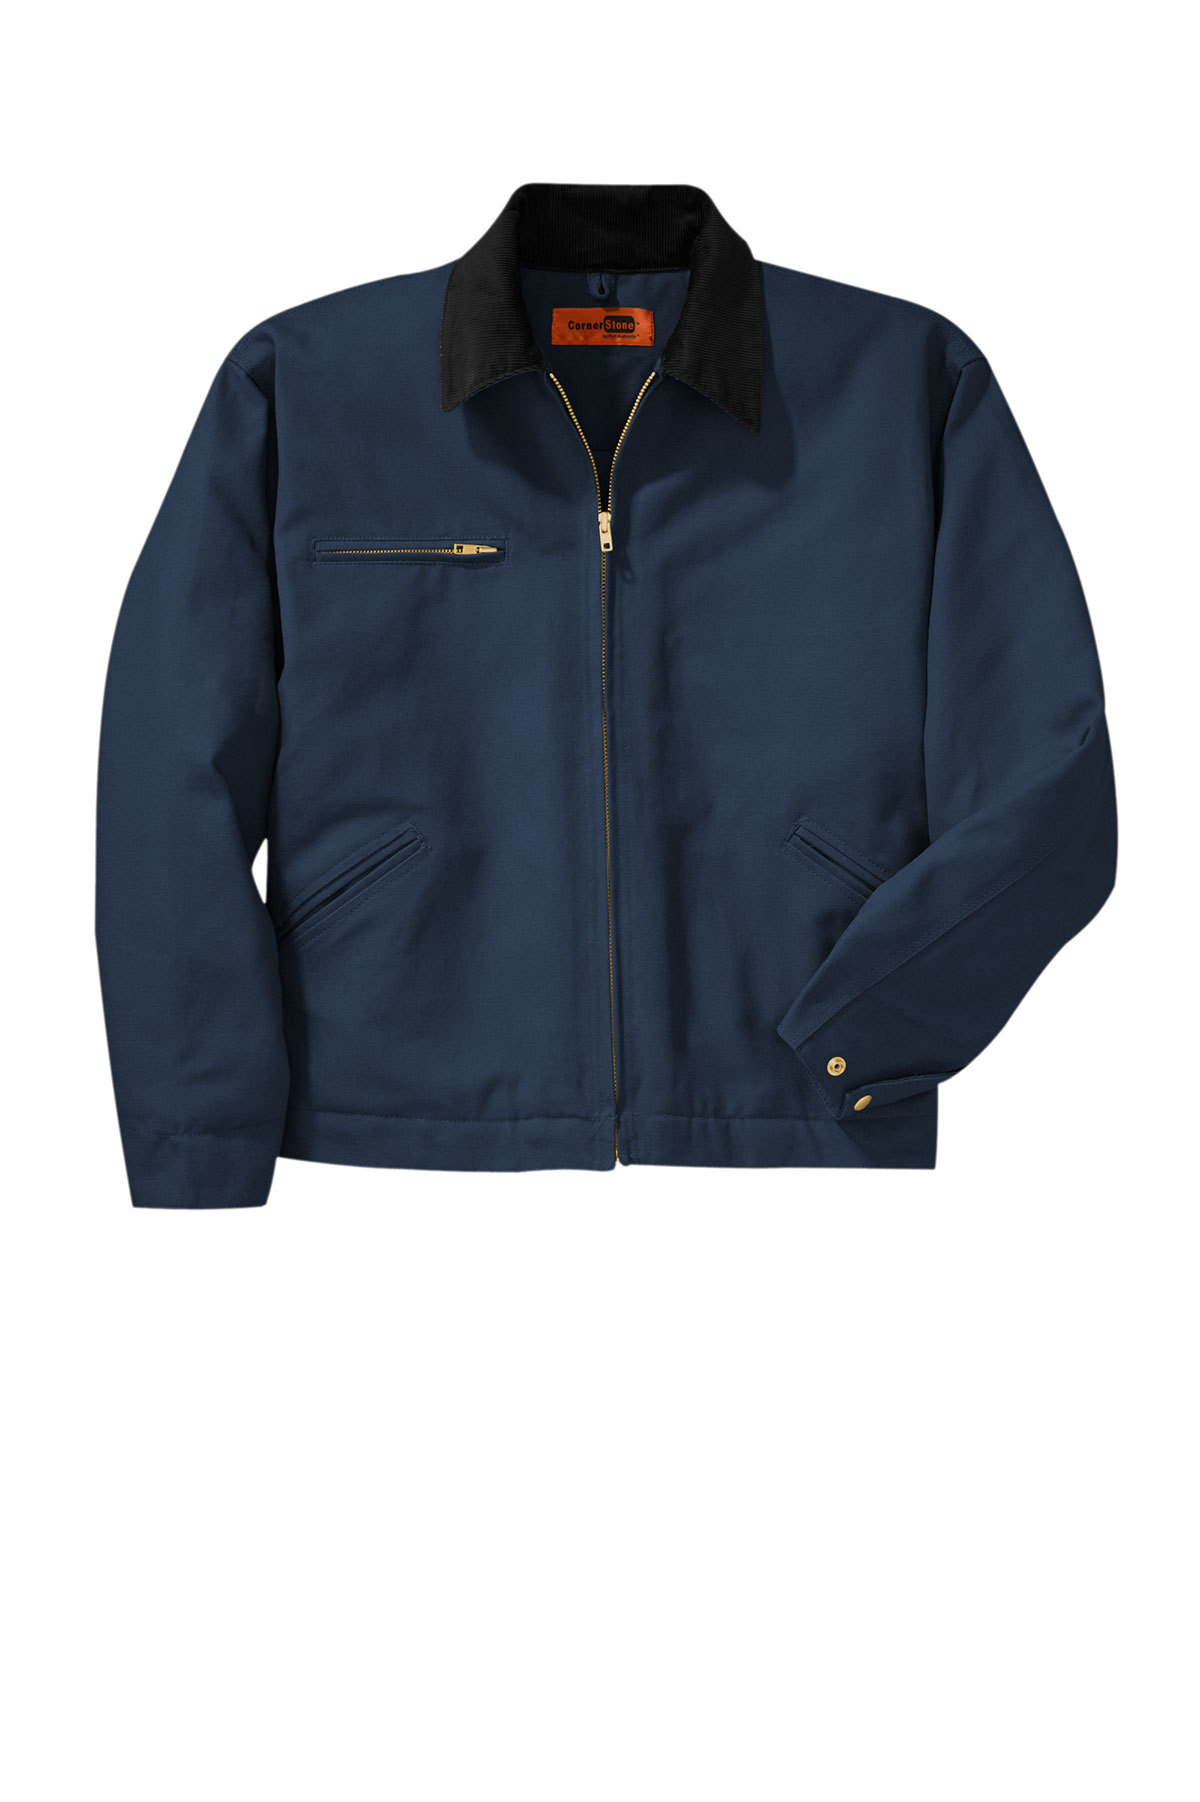 CornerStone - Duck Cloth Work Jacket | Product | Company Casuals